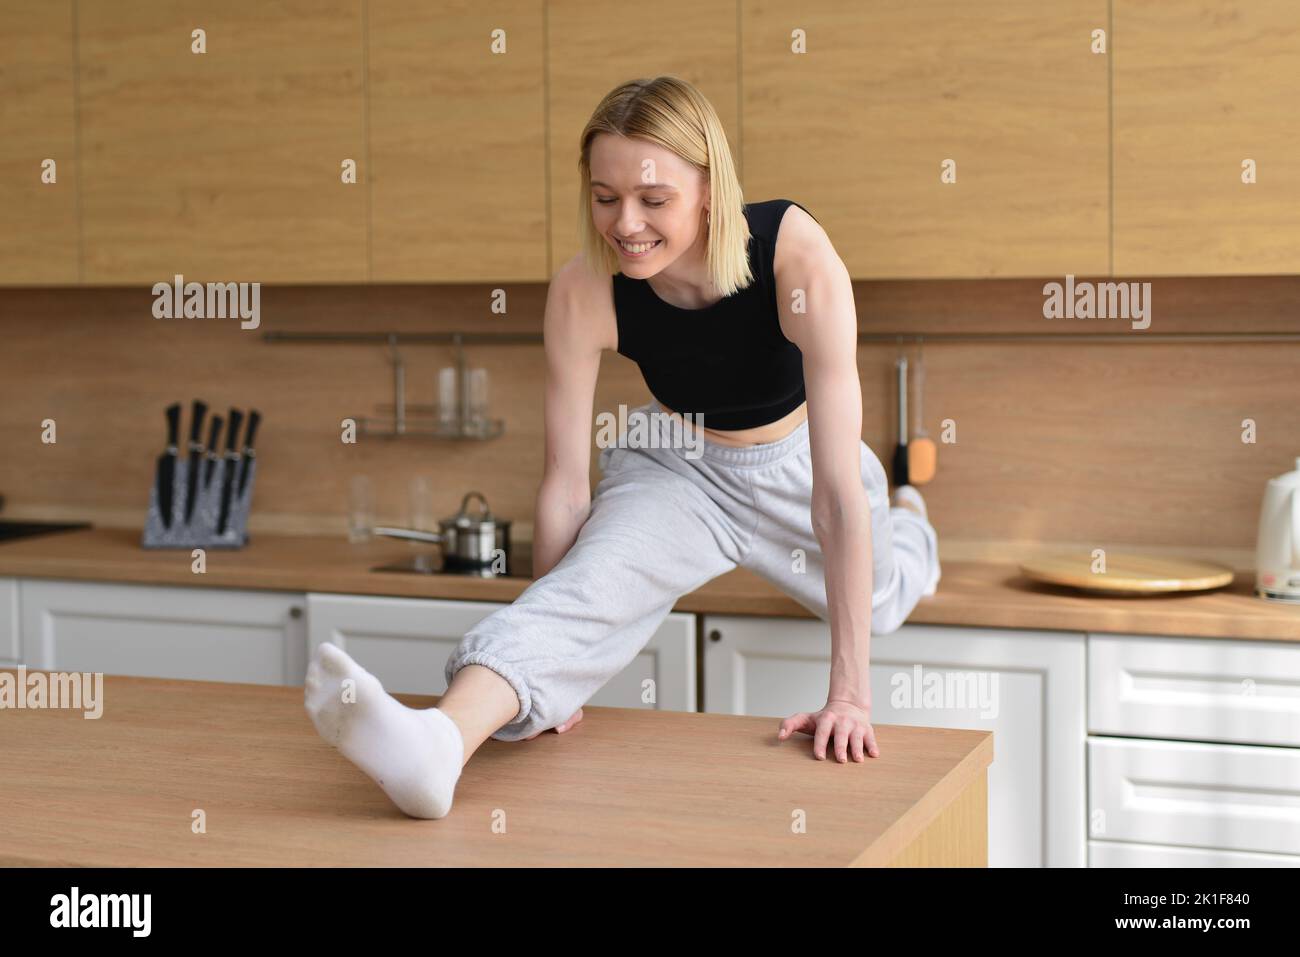 Woman doing the splits in kitchen between tables. Stock Photo